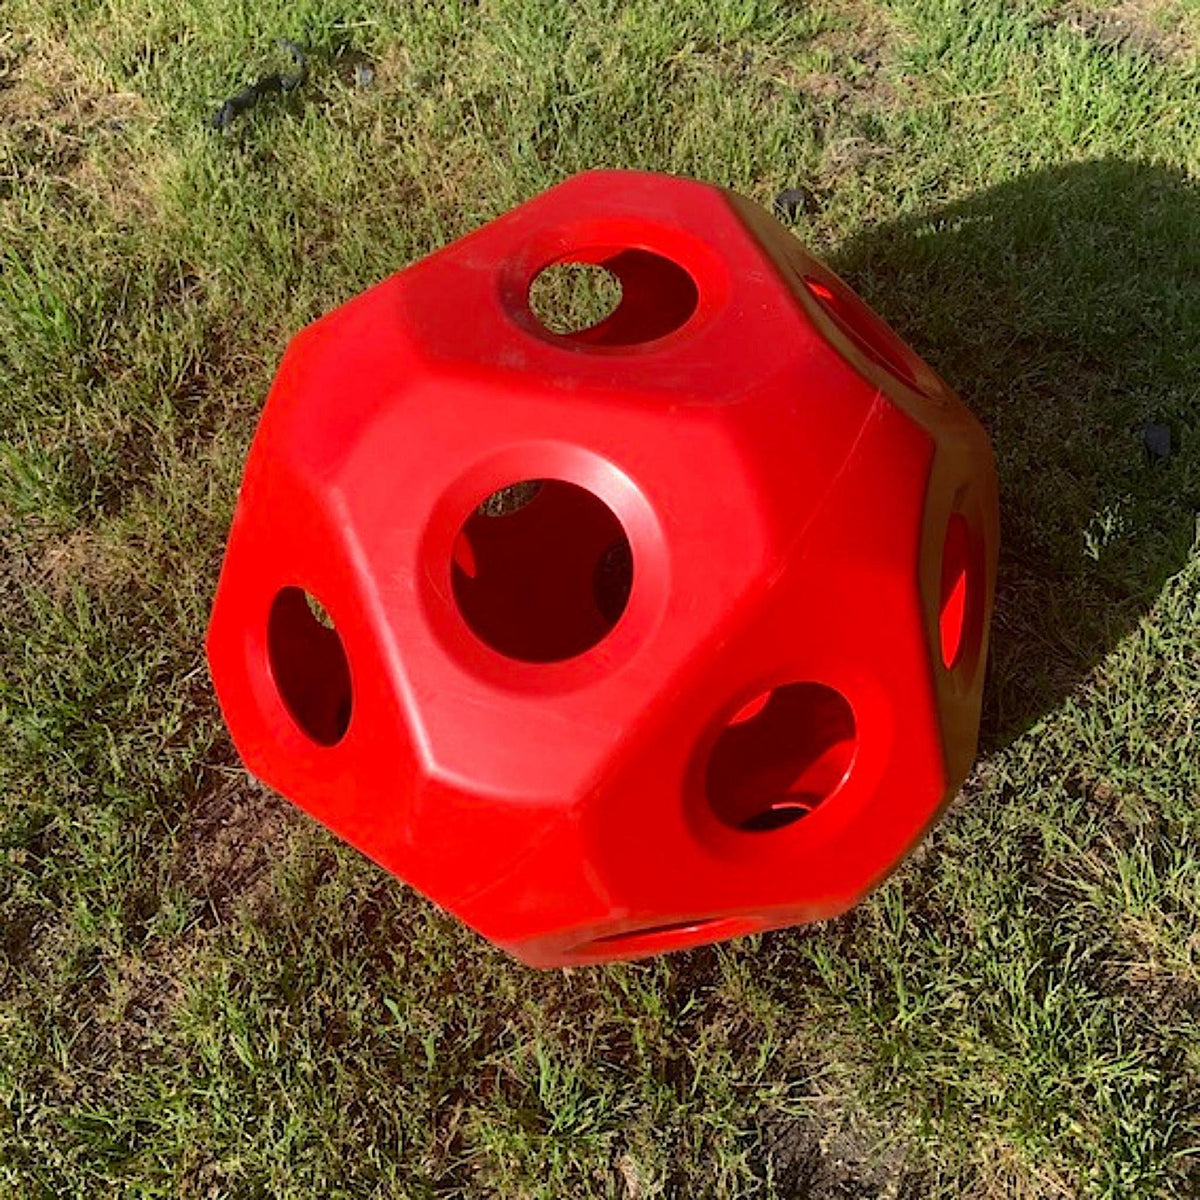 Red plastic hay ball with flat sides and moderately sized holes throughout.